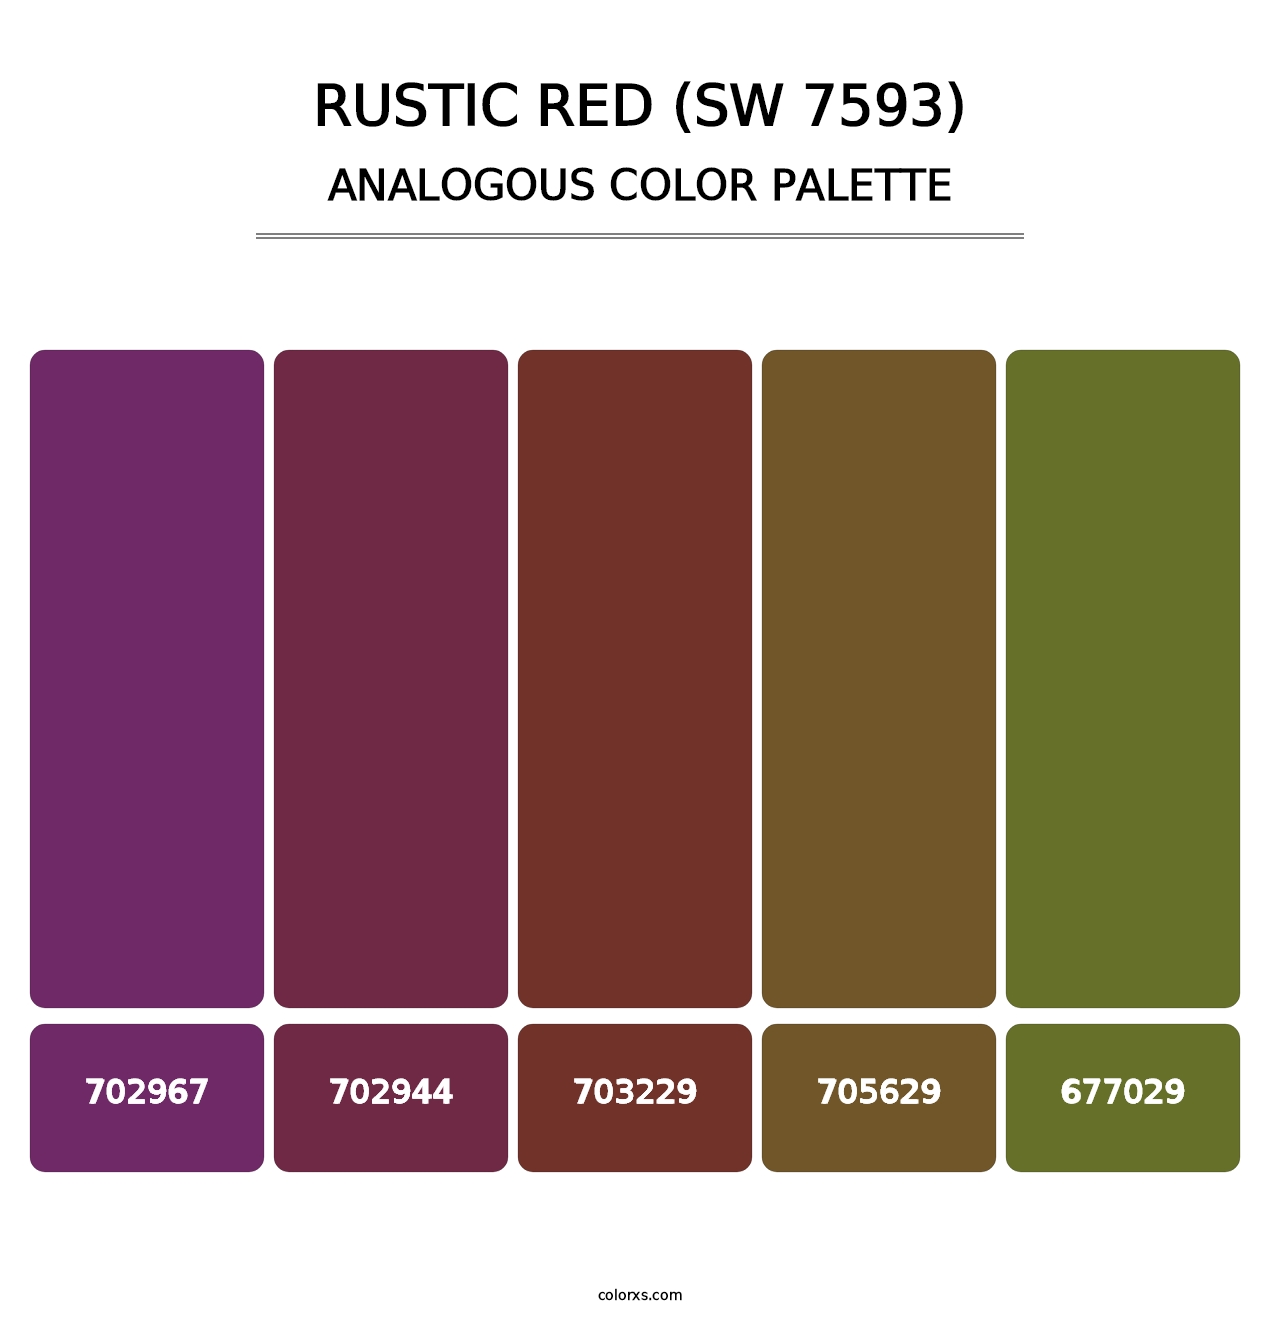 Rustic Red (SW 7593) - Analogous Color Palette